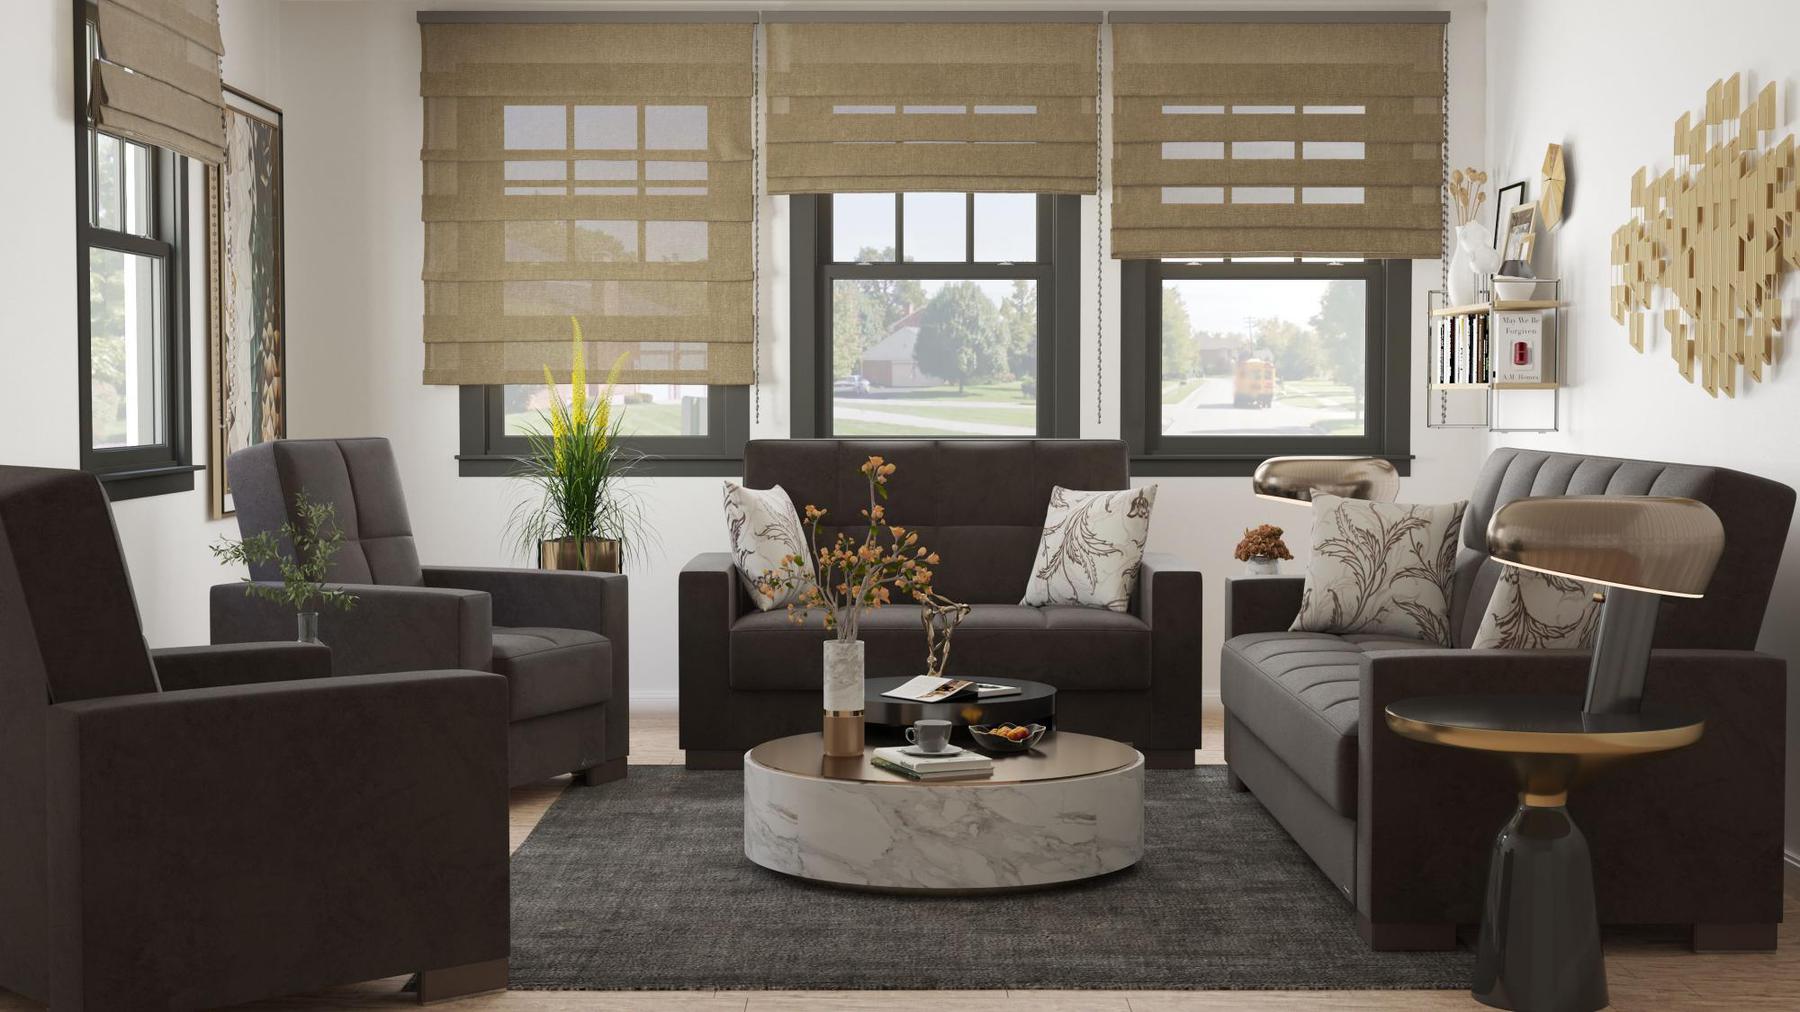 Modern design, Friar Brown , Microfiber upholstered convertible sleeper Loveseat with underseat storage from Voyage Track by Ottomanson in living room lifestyle setting with the matching furniture set. This Loveseat measures 67 inches width by 36 inches depth by 41 inches height.